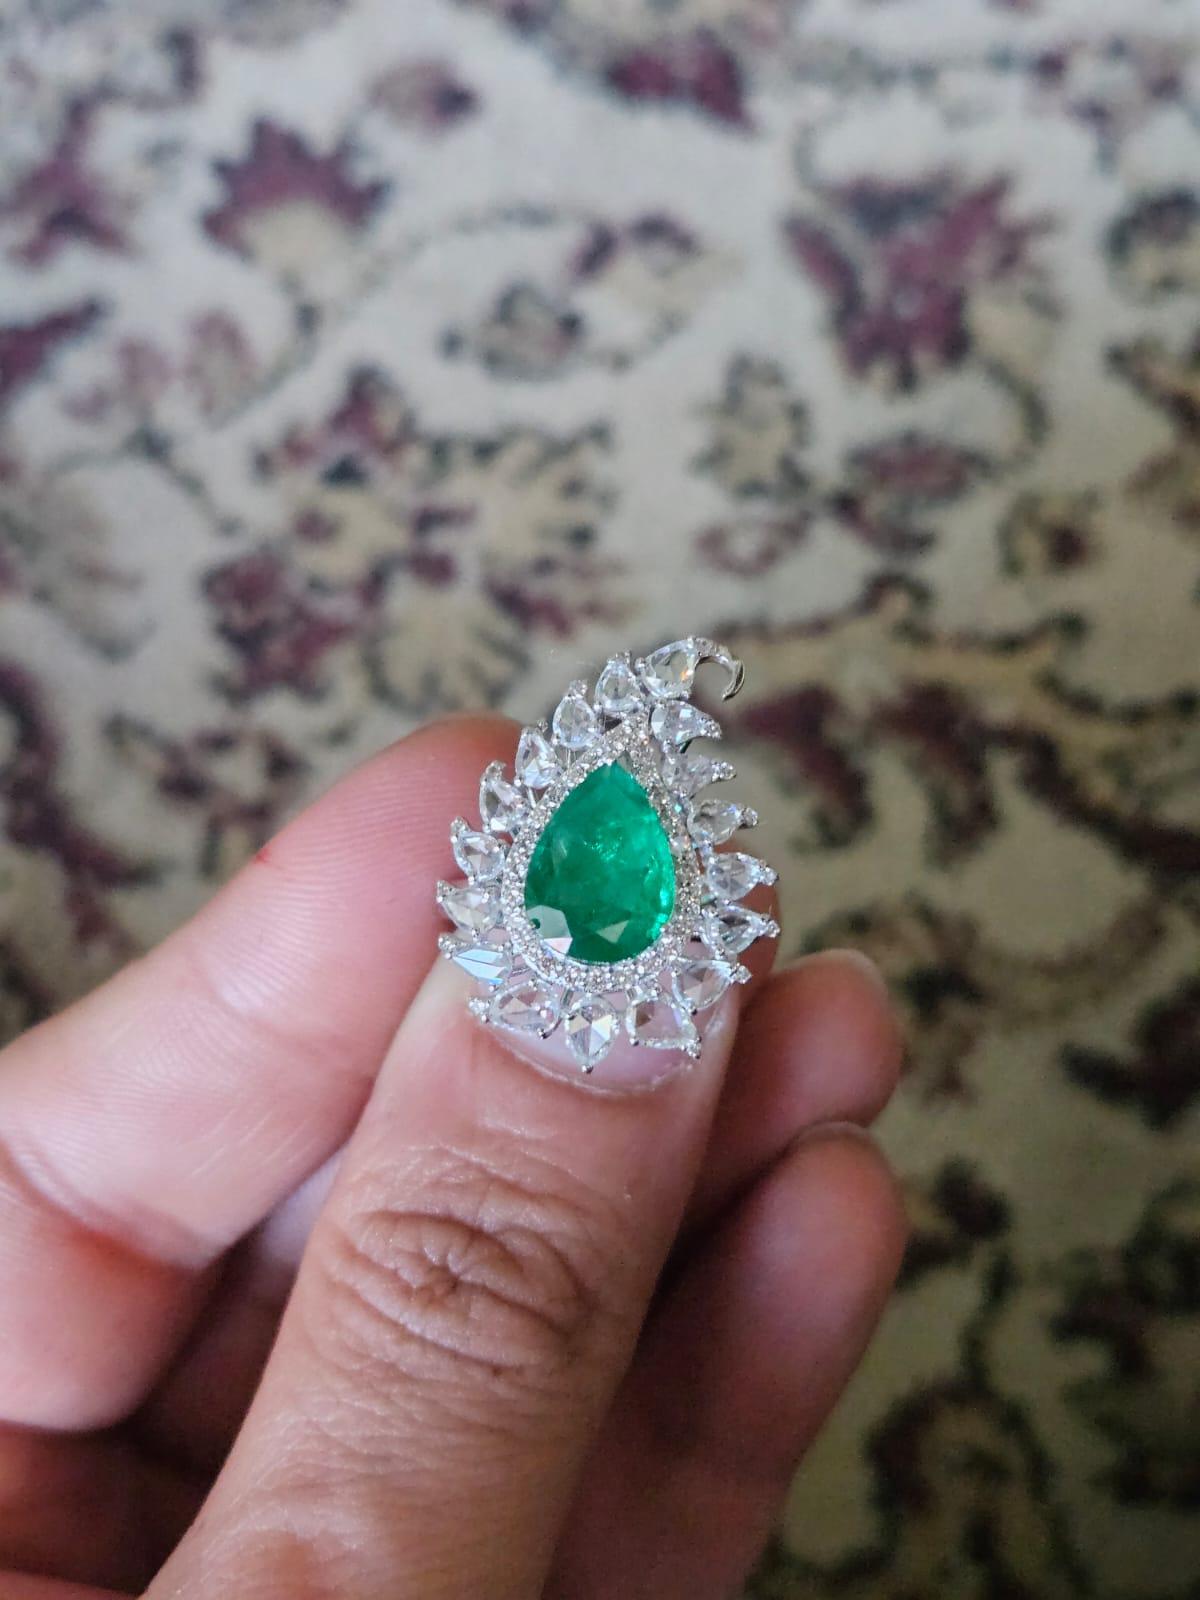 A very gorgeous and beautiful, one of a kind, Emerald Cocktail Ring set in 18K White Gold & Diamonds. The weight of the pear shaped Emerald is 2.27 carats. The Emerald is completely natural, without any treatment and is of Zambian origin. The